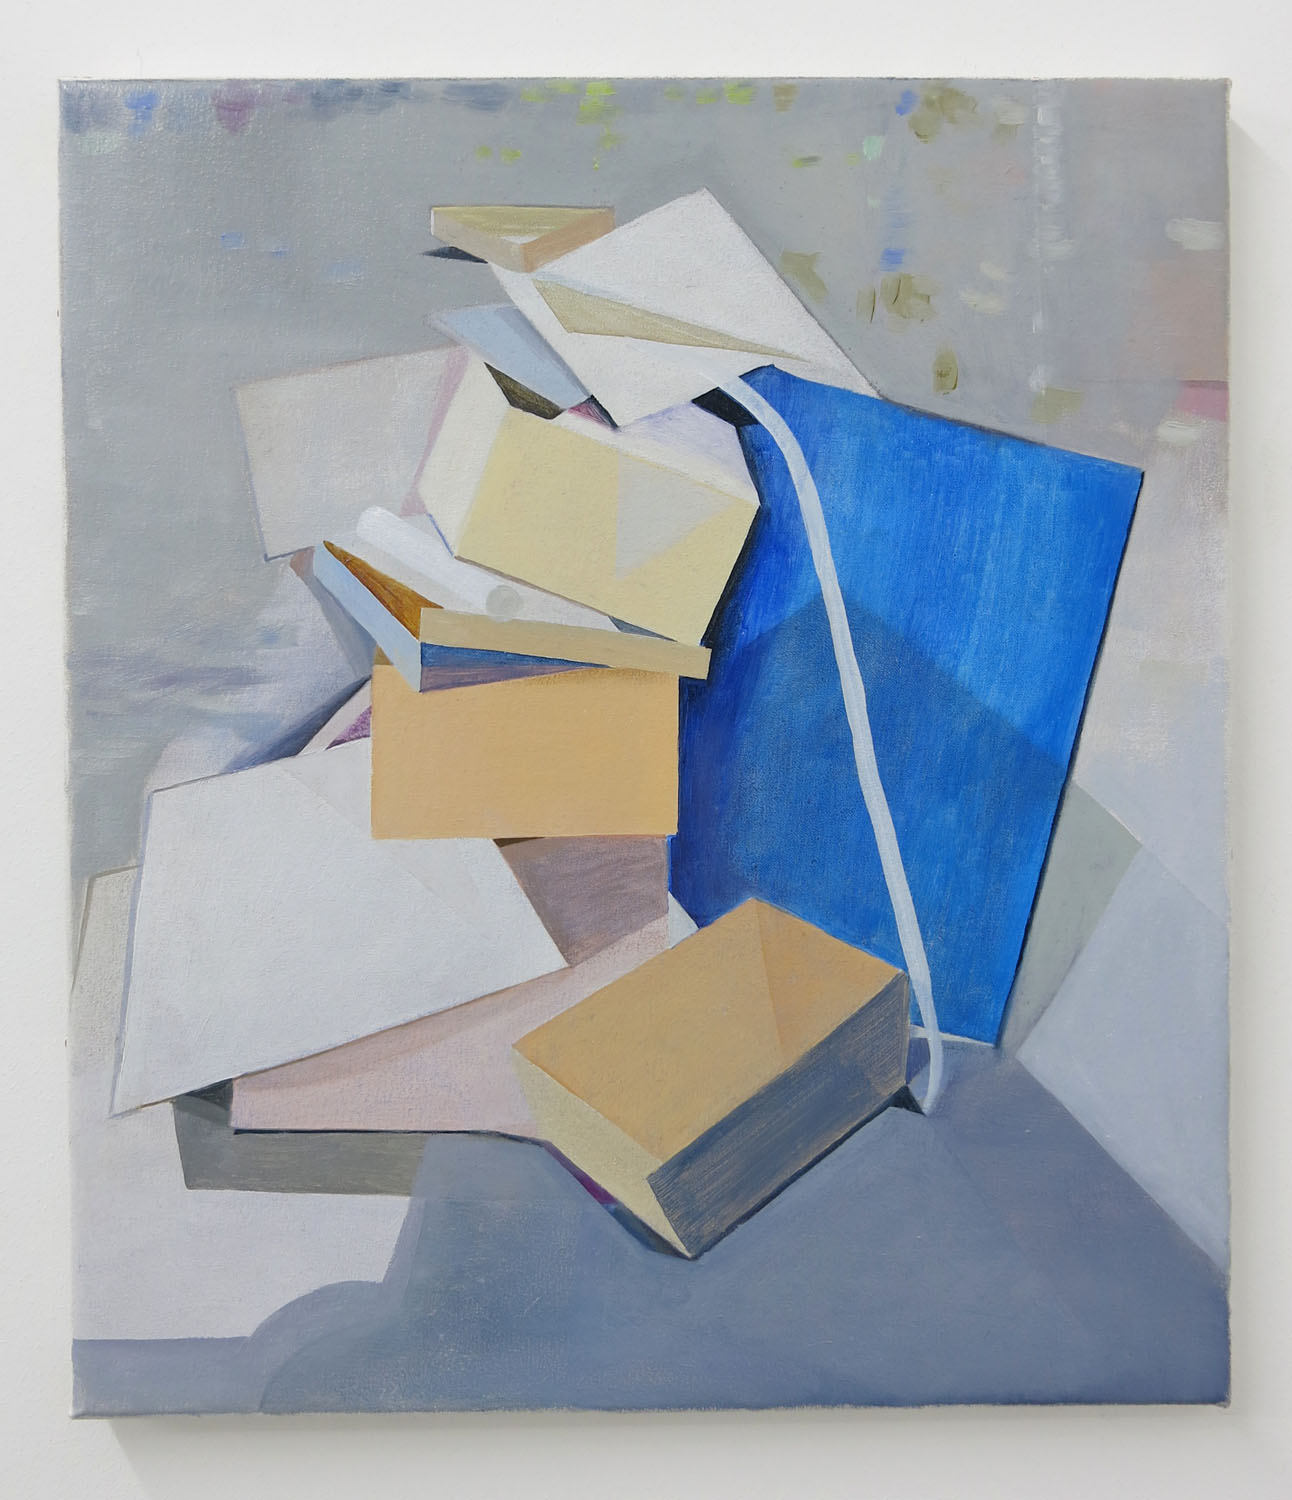   Blue Perspex    2013, oil on canvas, 40 x 35cm  